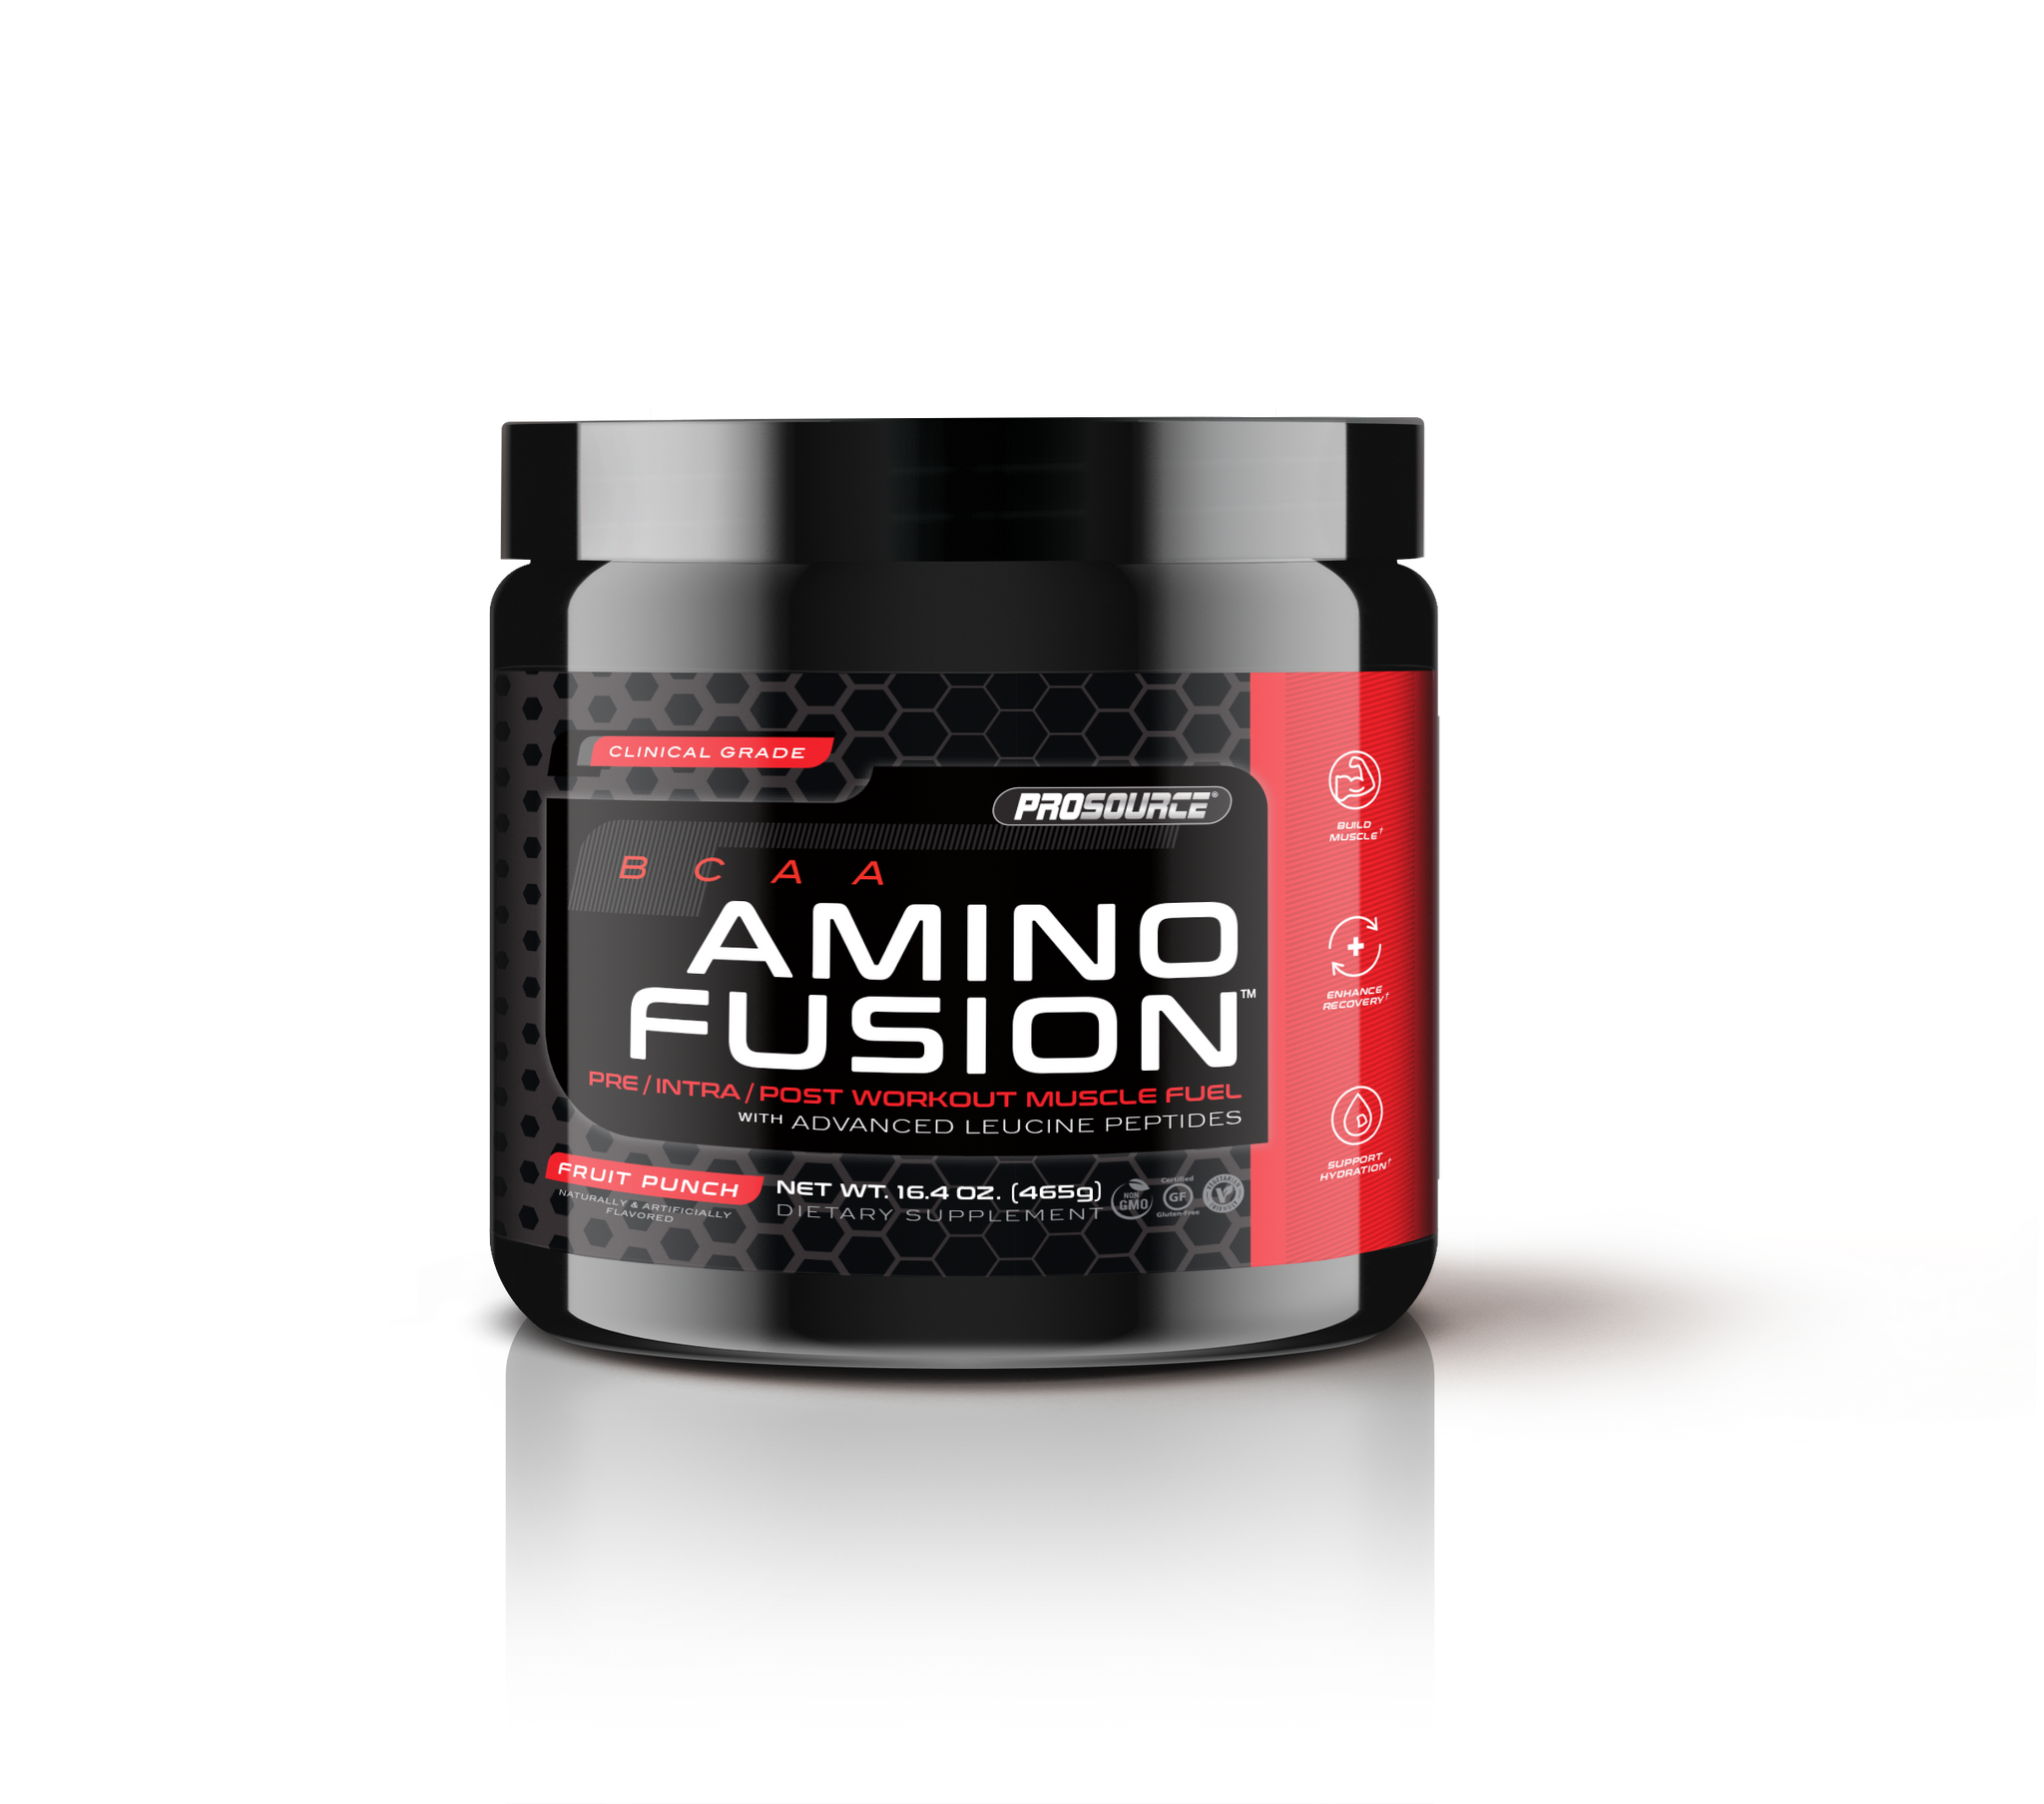 BCAA amino fusion pre/intra/post workout muscle fuel with advanced leucine peptides fruit punch